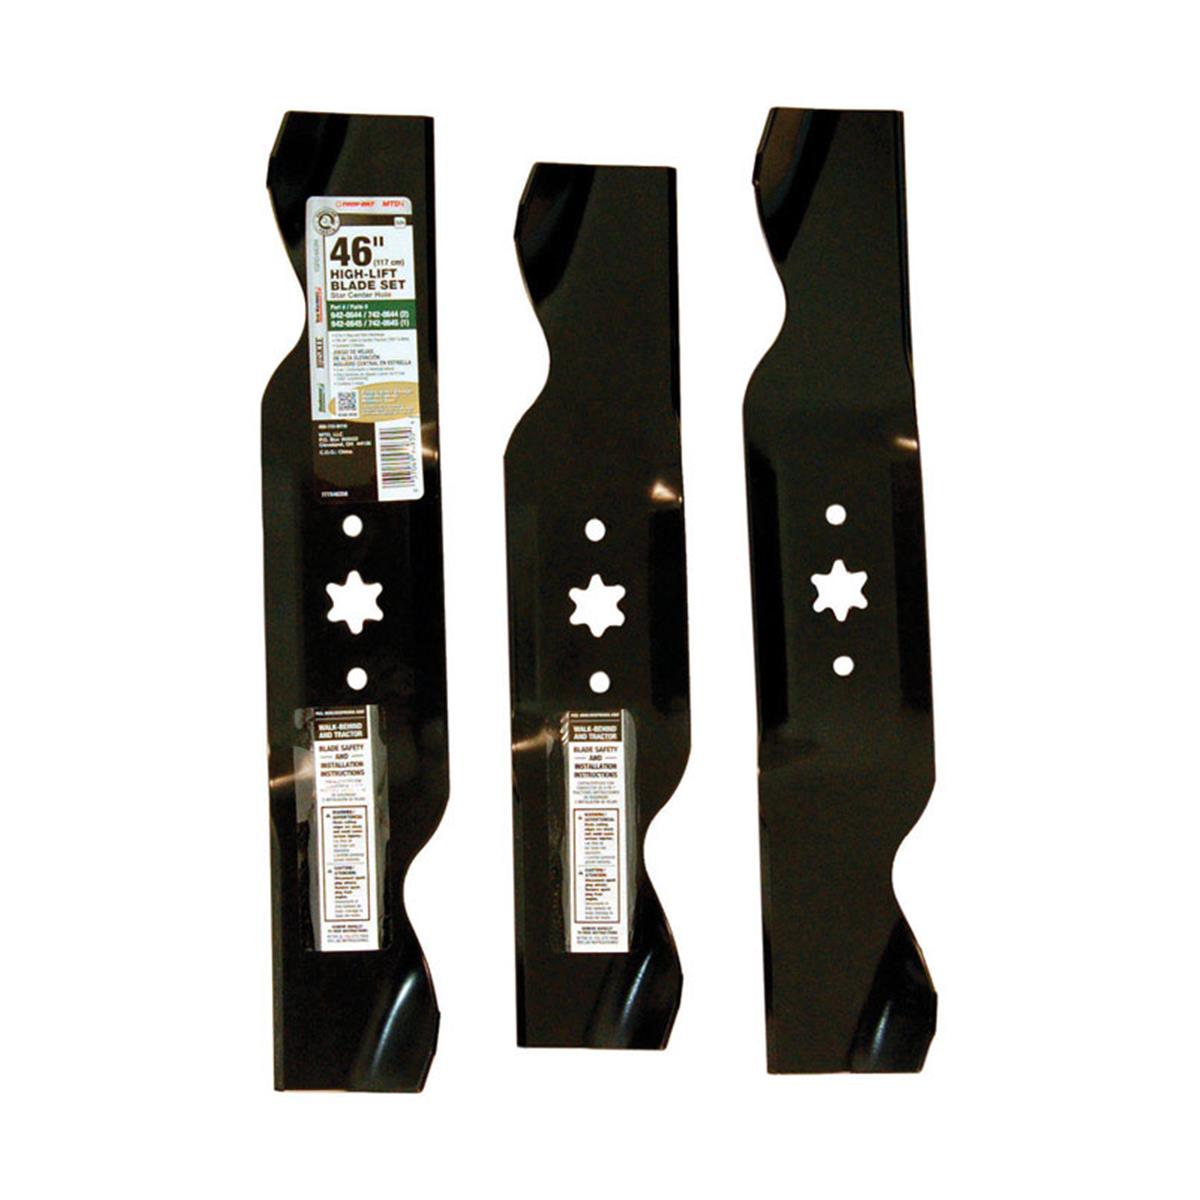 490-110-m116 46 In. High-lift Blade Set